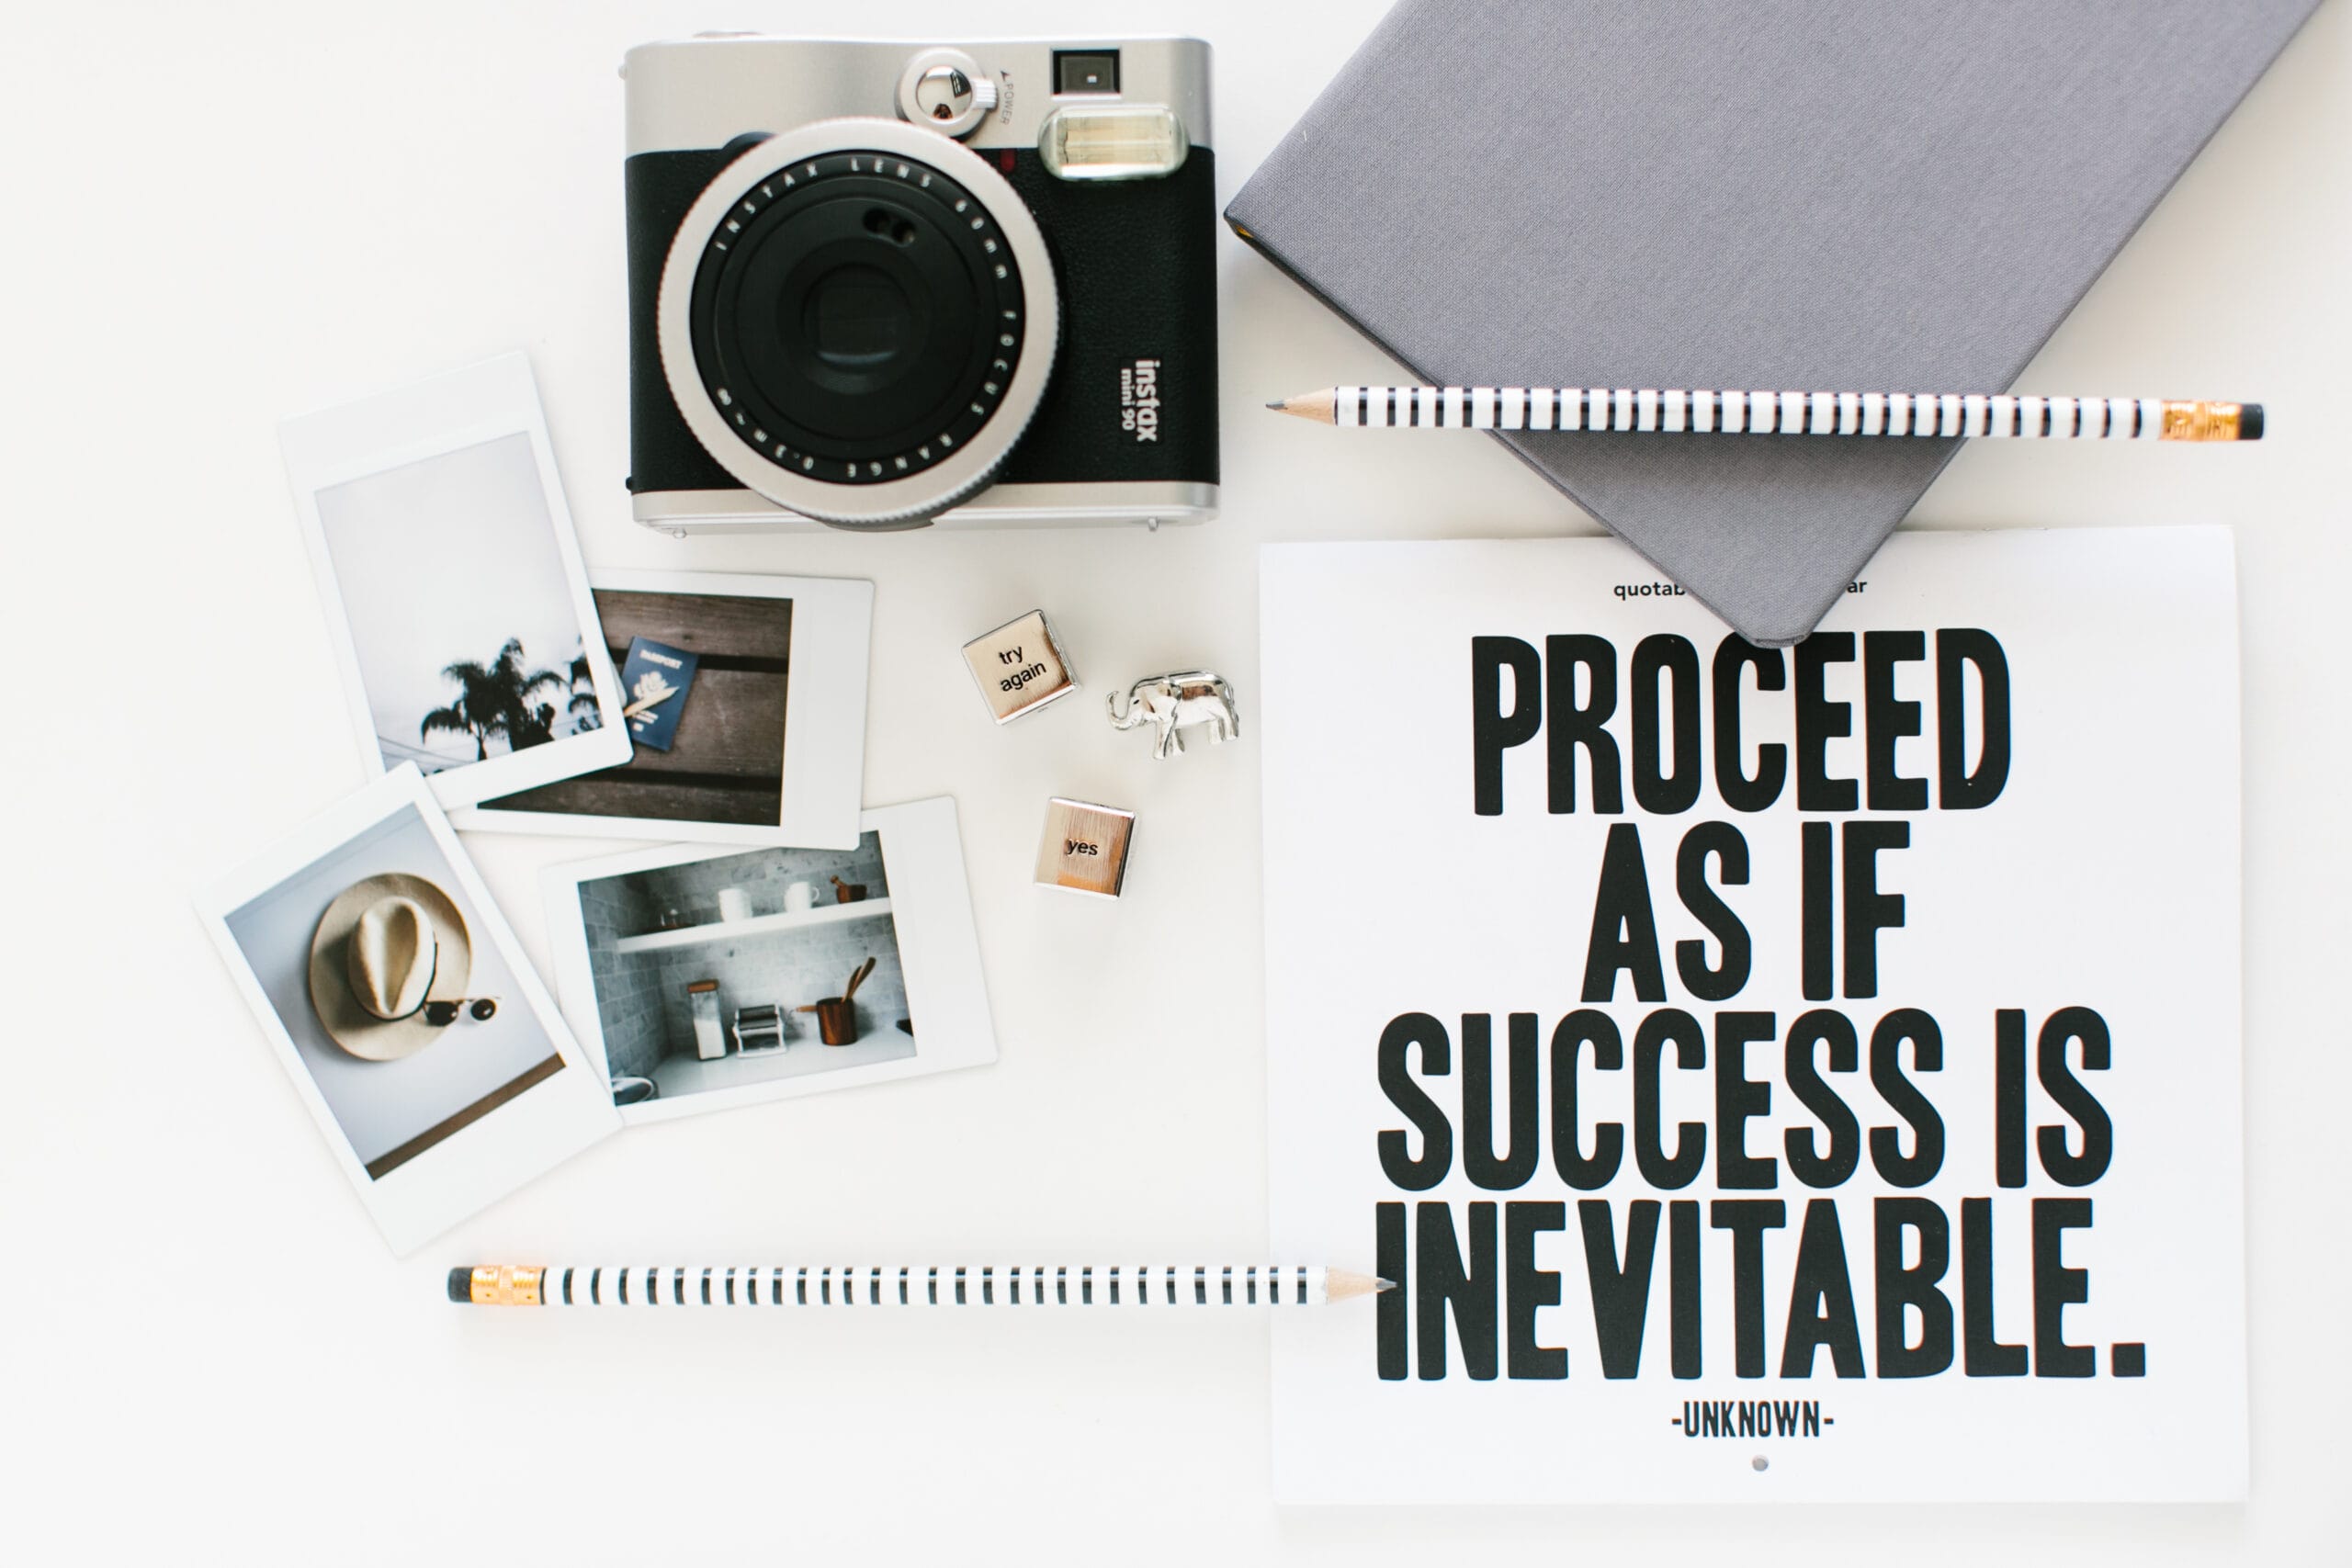 Flatlay of a camera and accessories with an uplifting quote saying "Proceed as if success is inevitable.